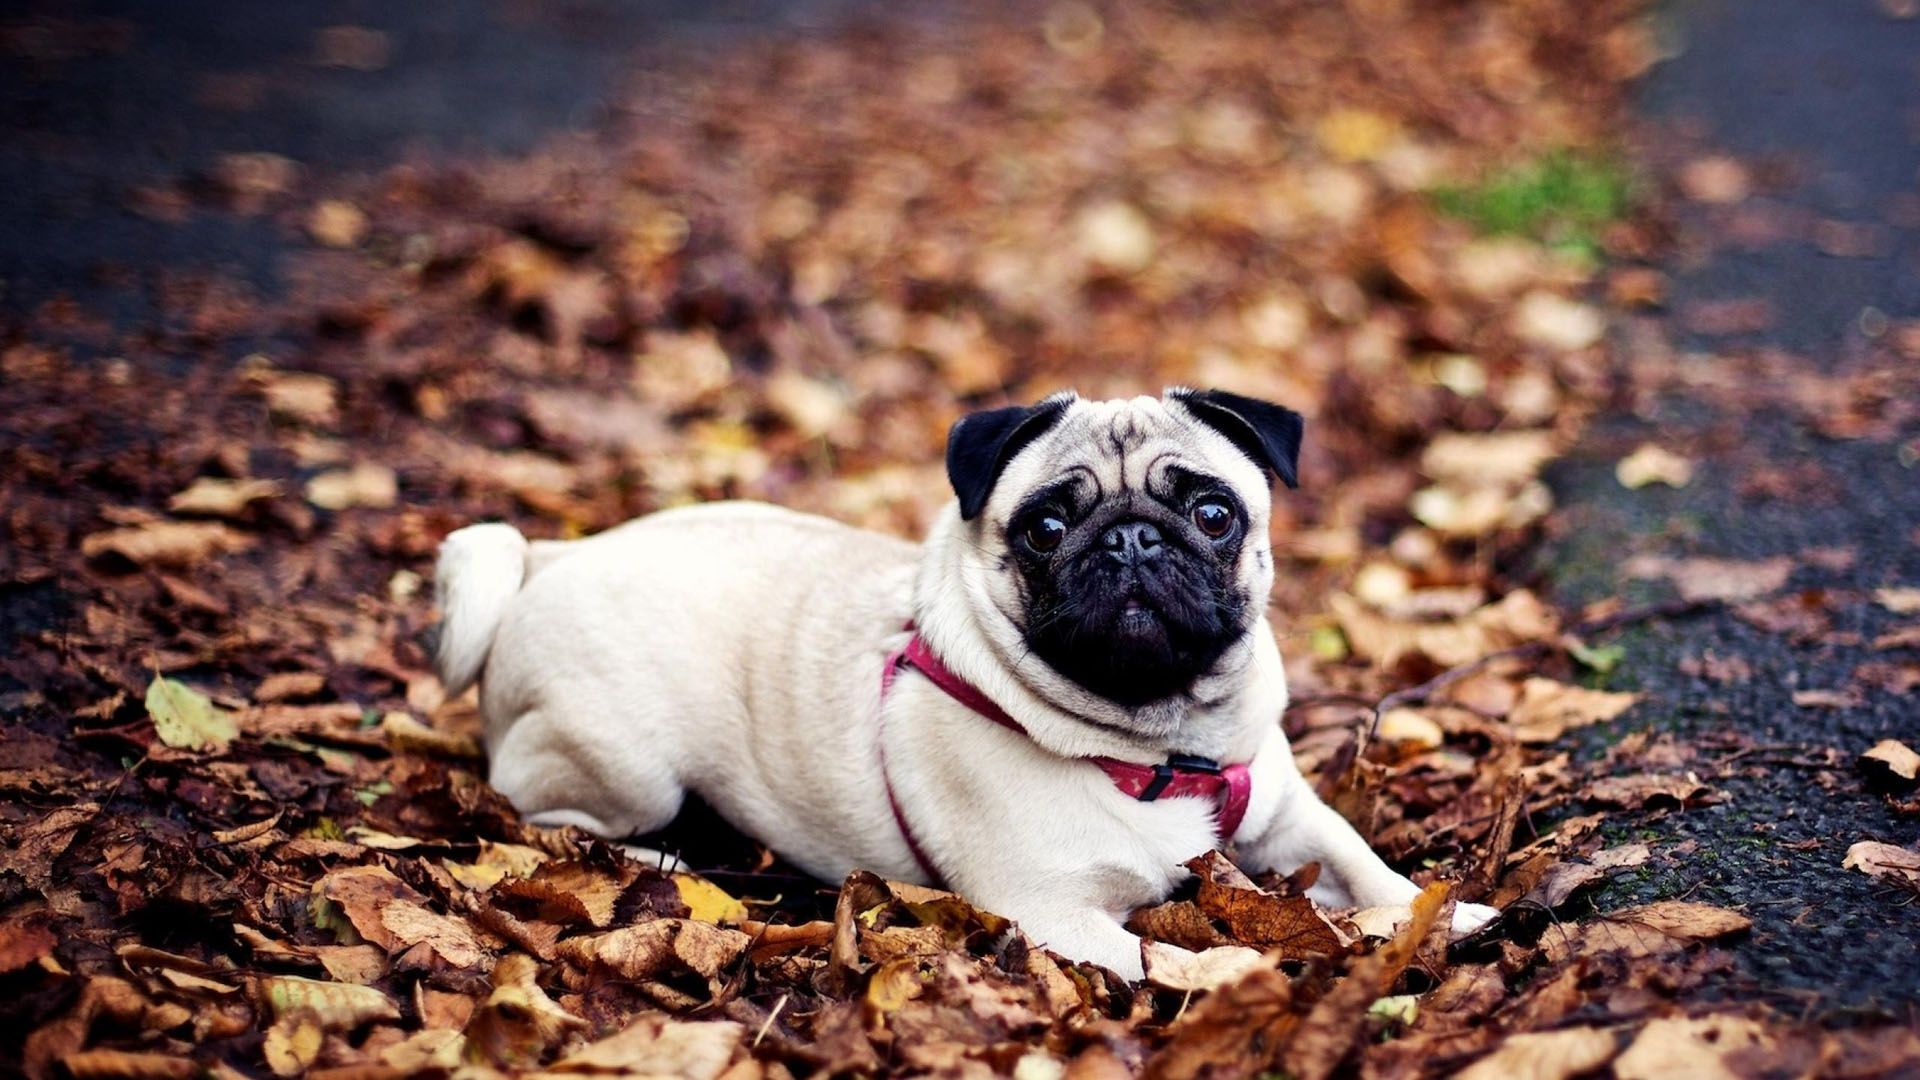 Wallpaper Of Pug Dog Just All New HD